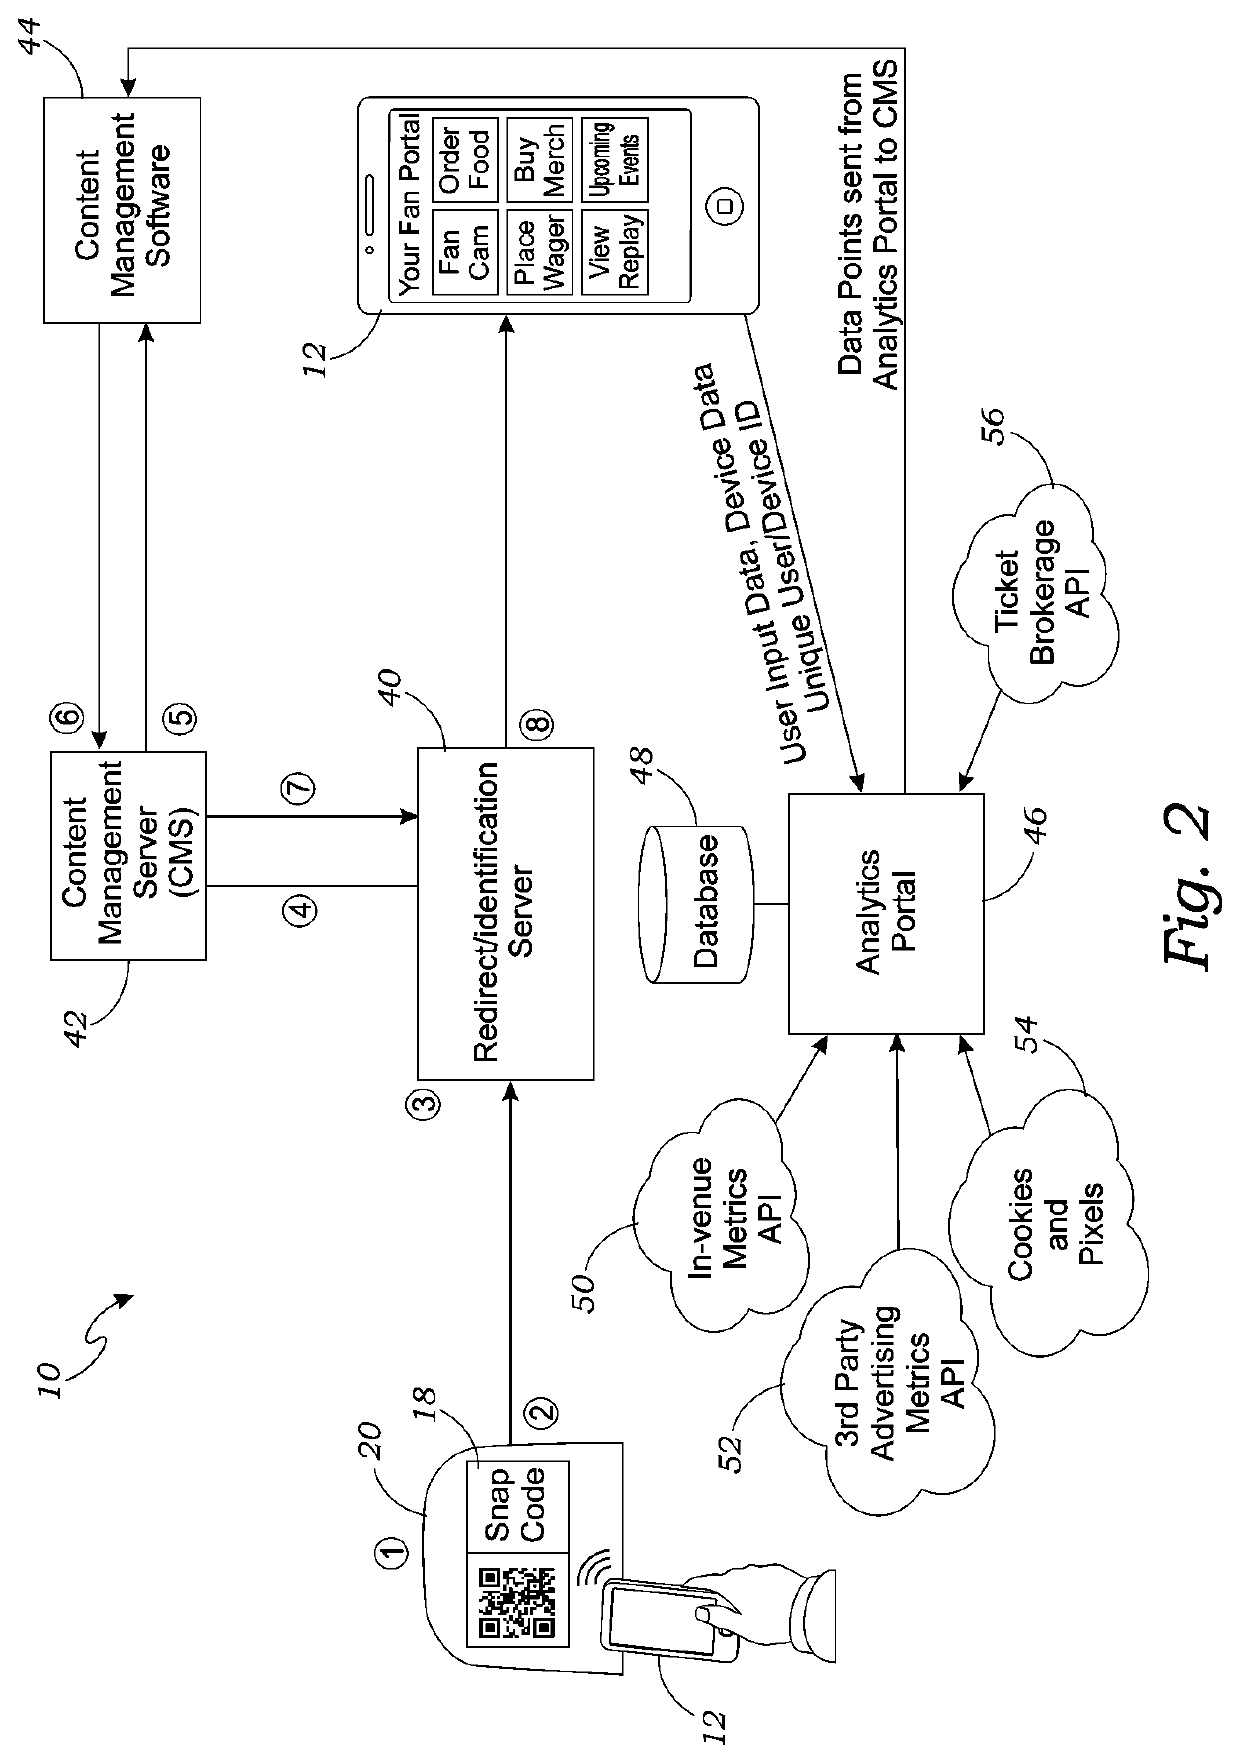 System and method for location-based individualized content and mobile wallet offers